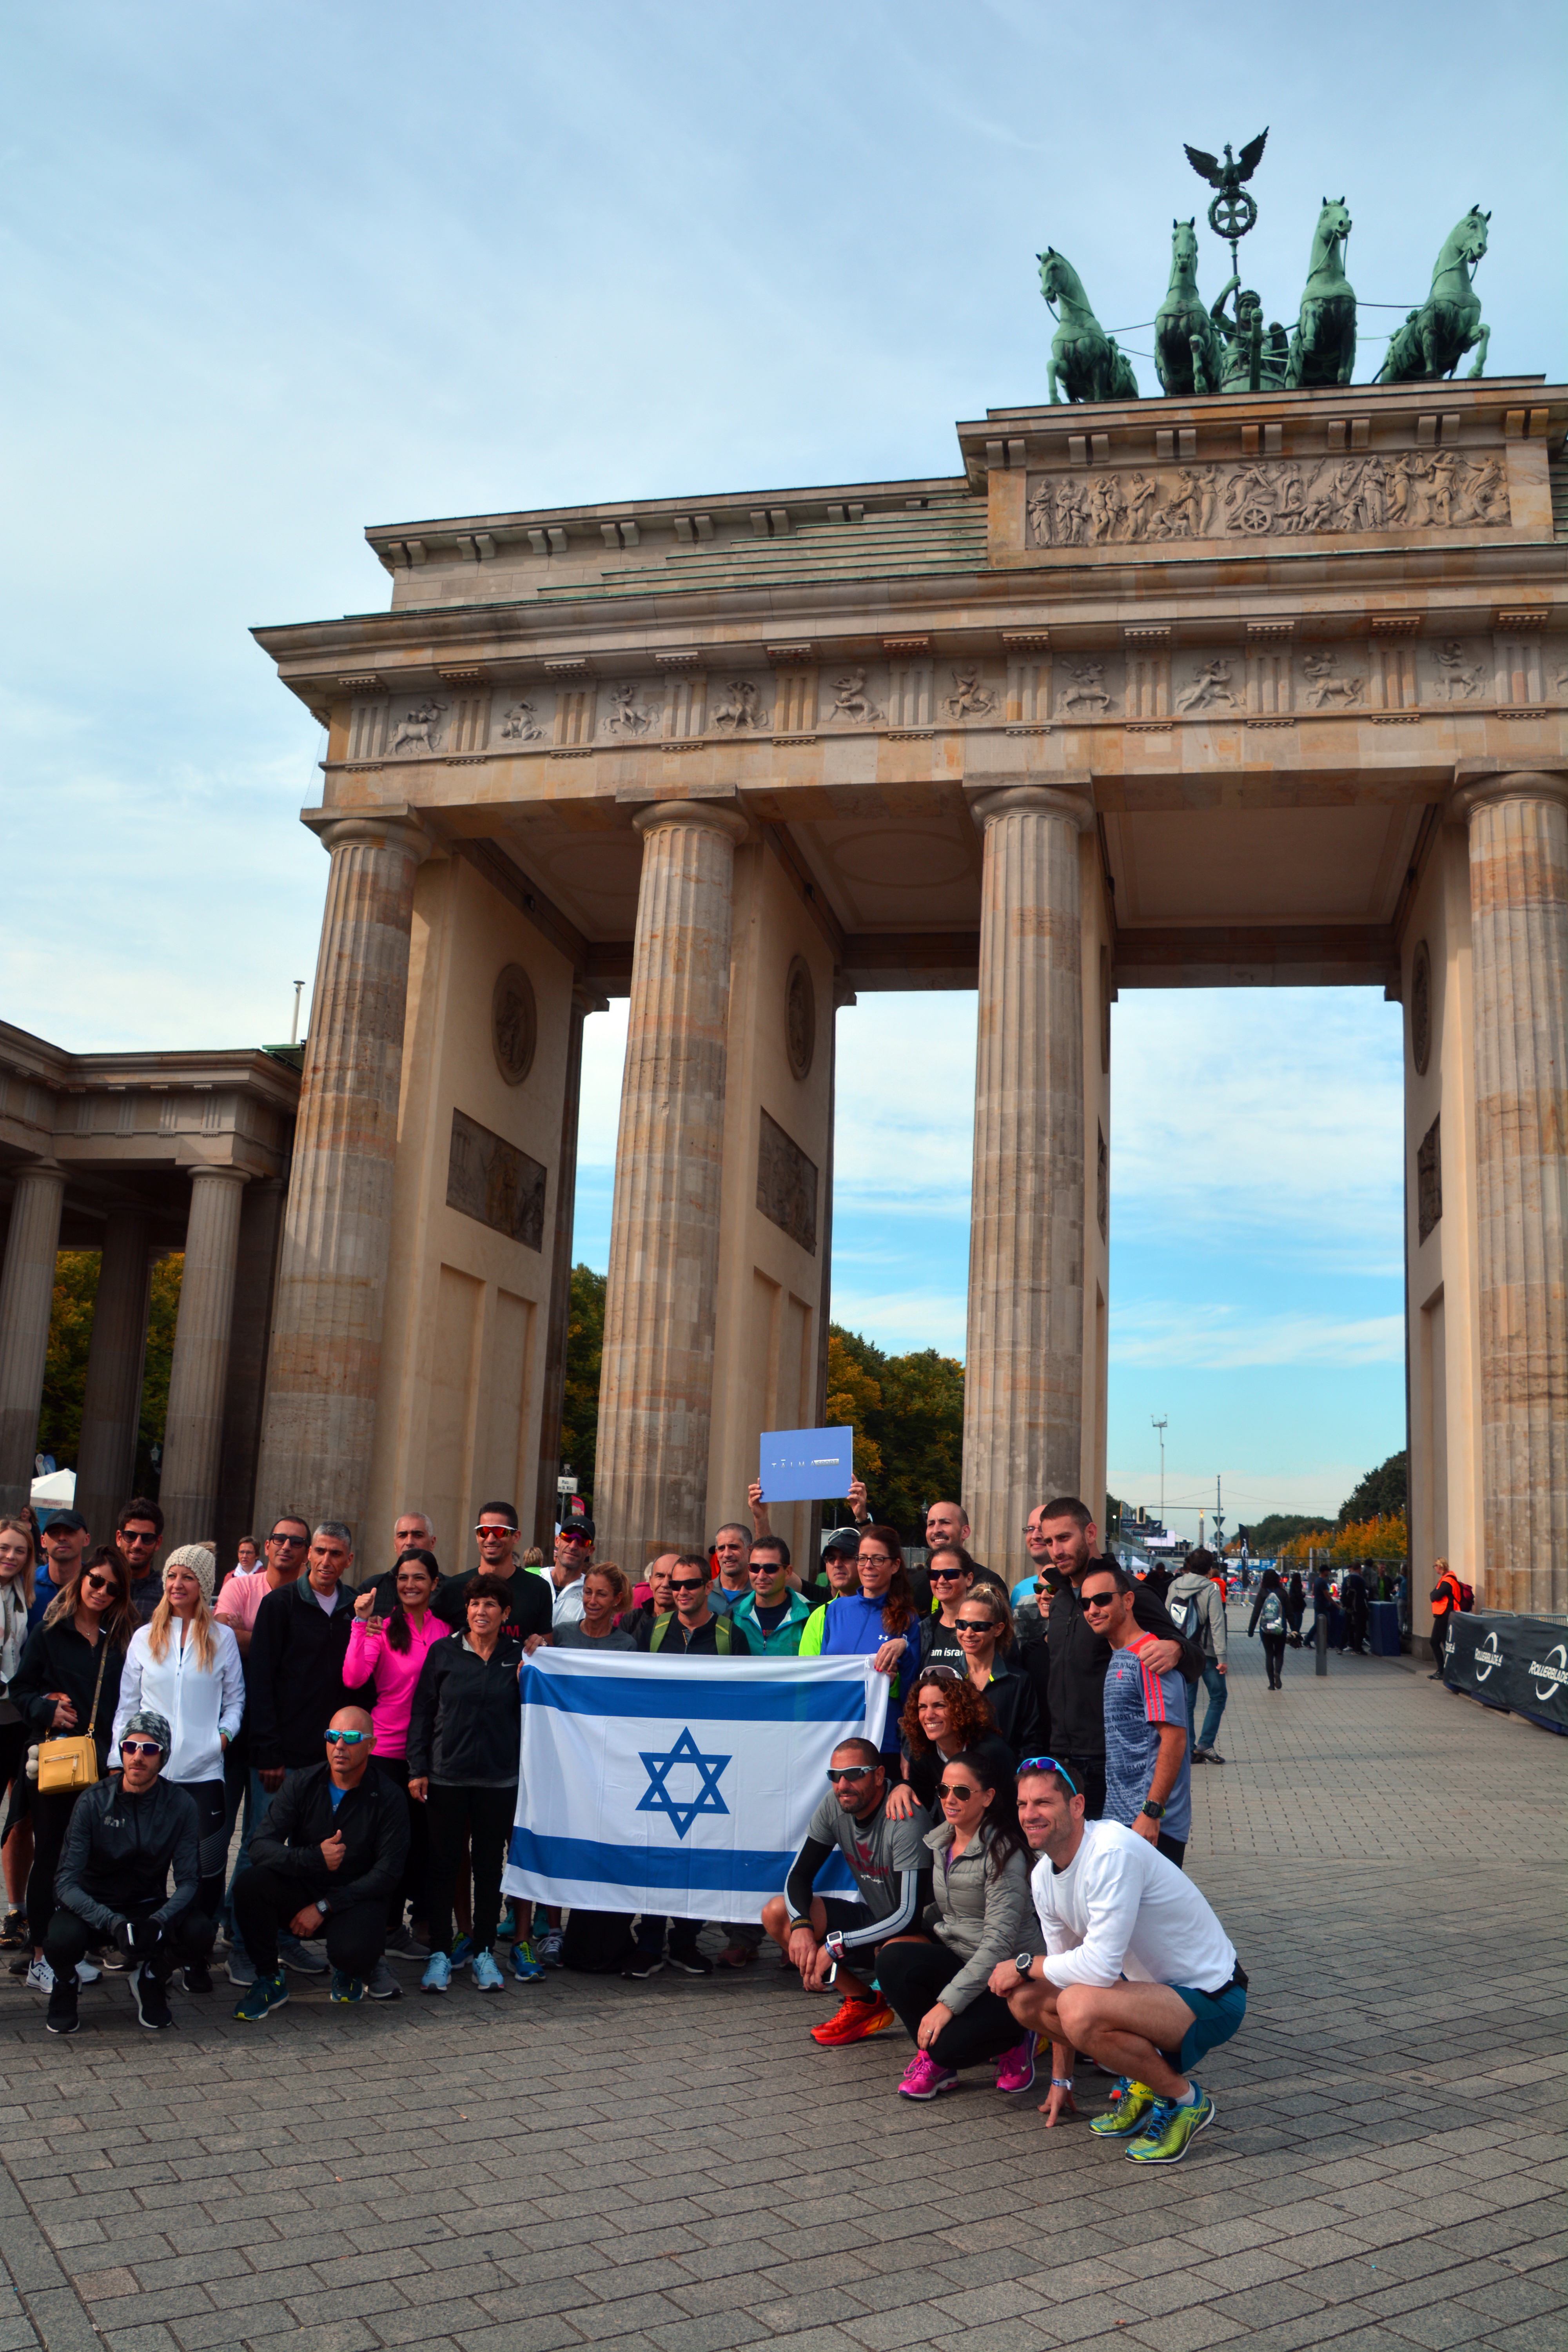 A team of Jewish runners from Israel for the Berlin marathon take a picture in front of the Brandenburg Gate